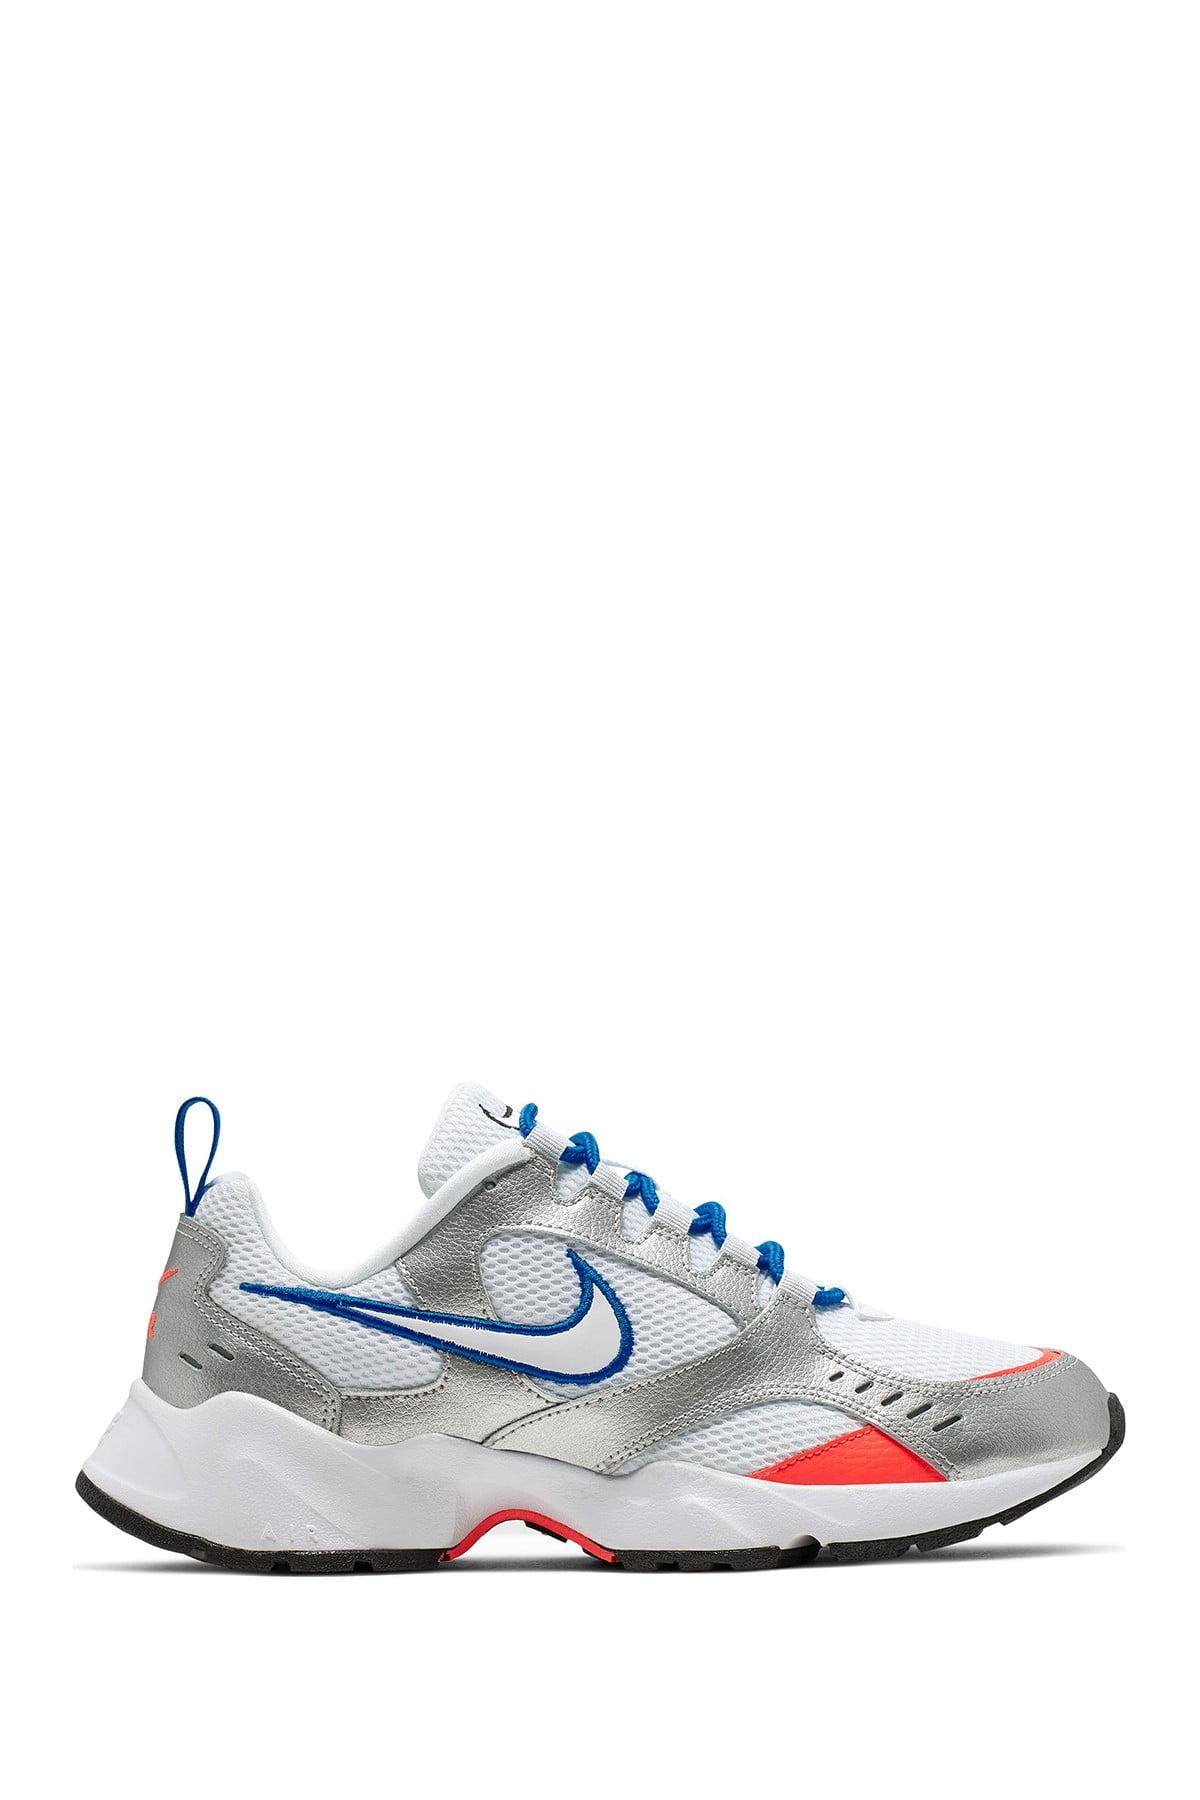 Nike Rubber Women's Air Heights Lifestyle Shoes in Silver (Blue) - Lyst